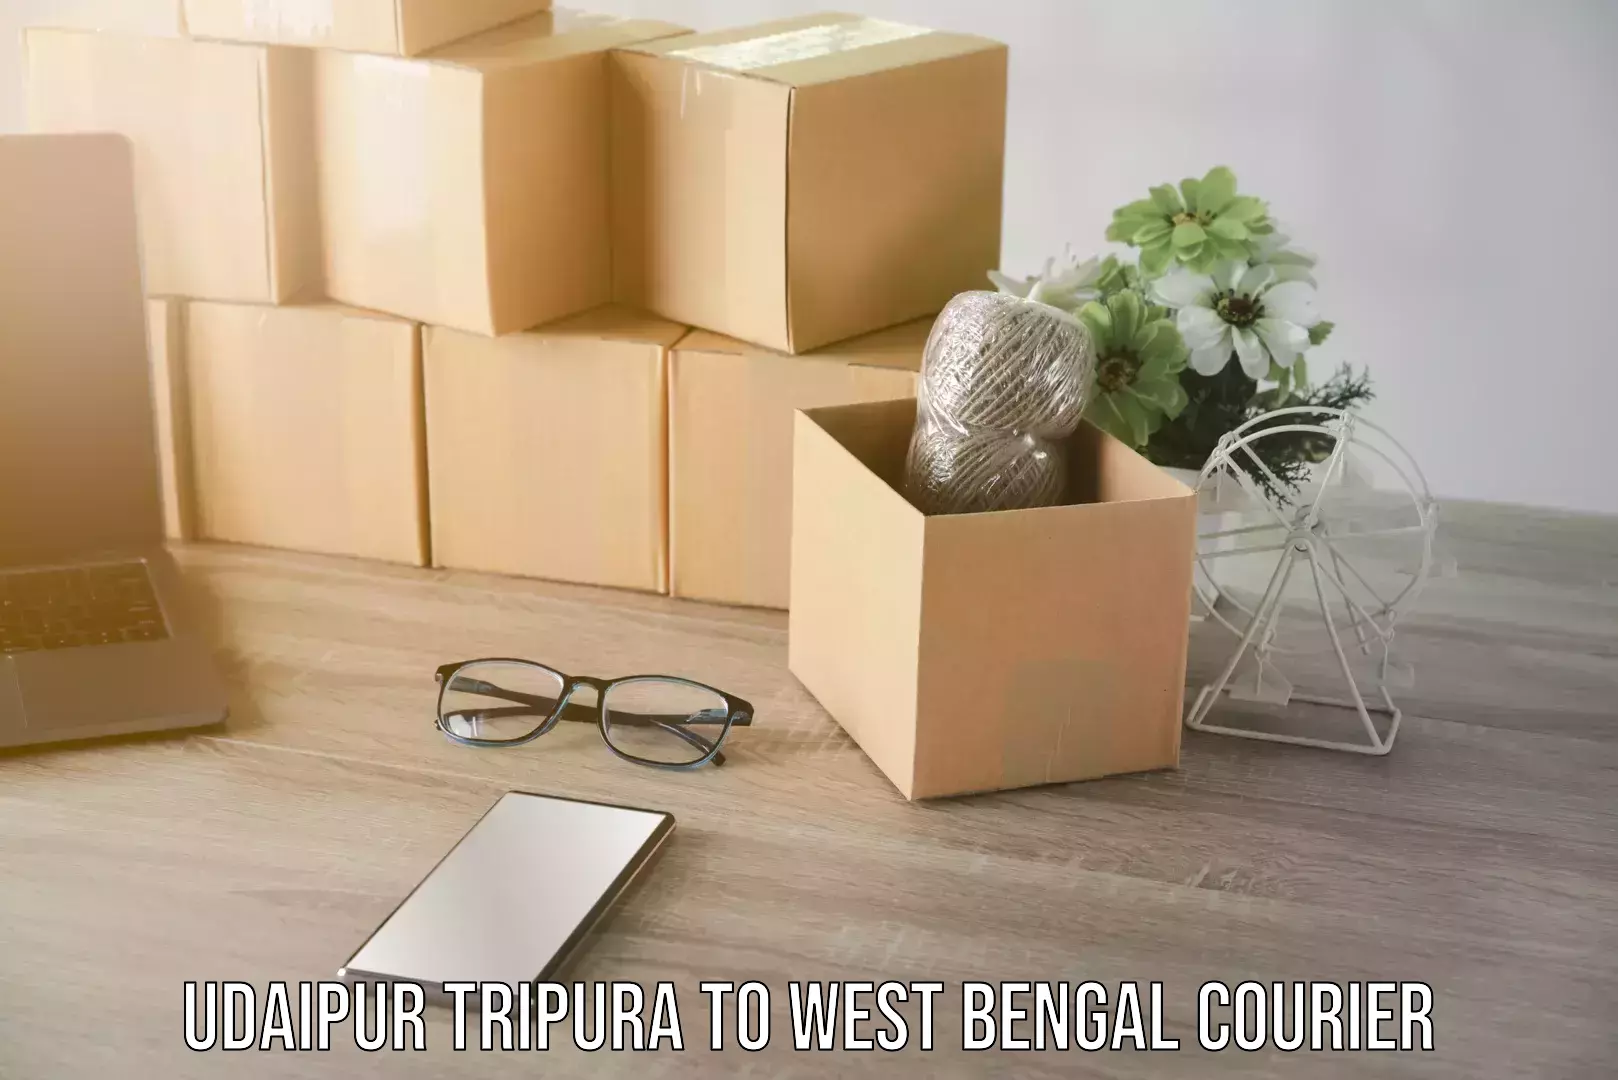 Automated parcel services Udaipur Tripura to West Bengal